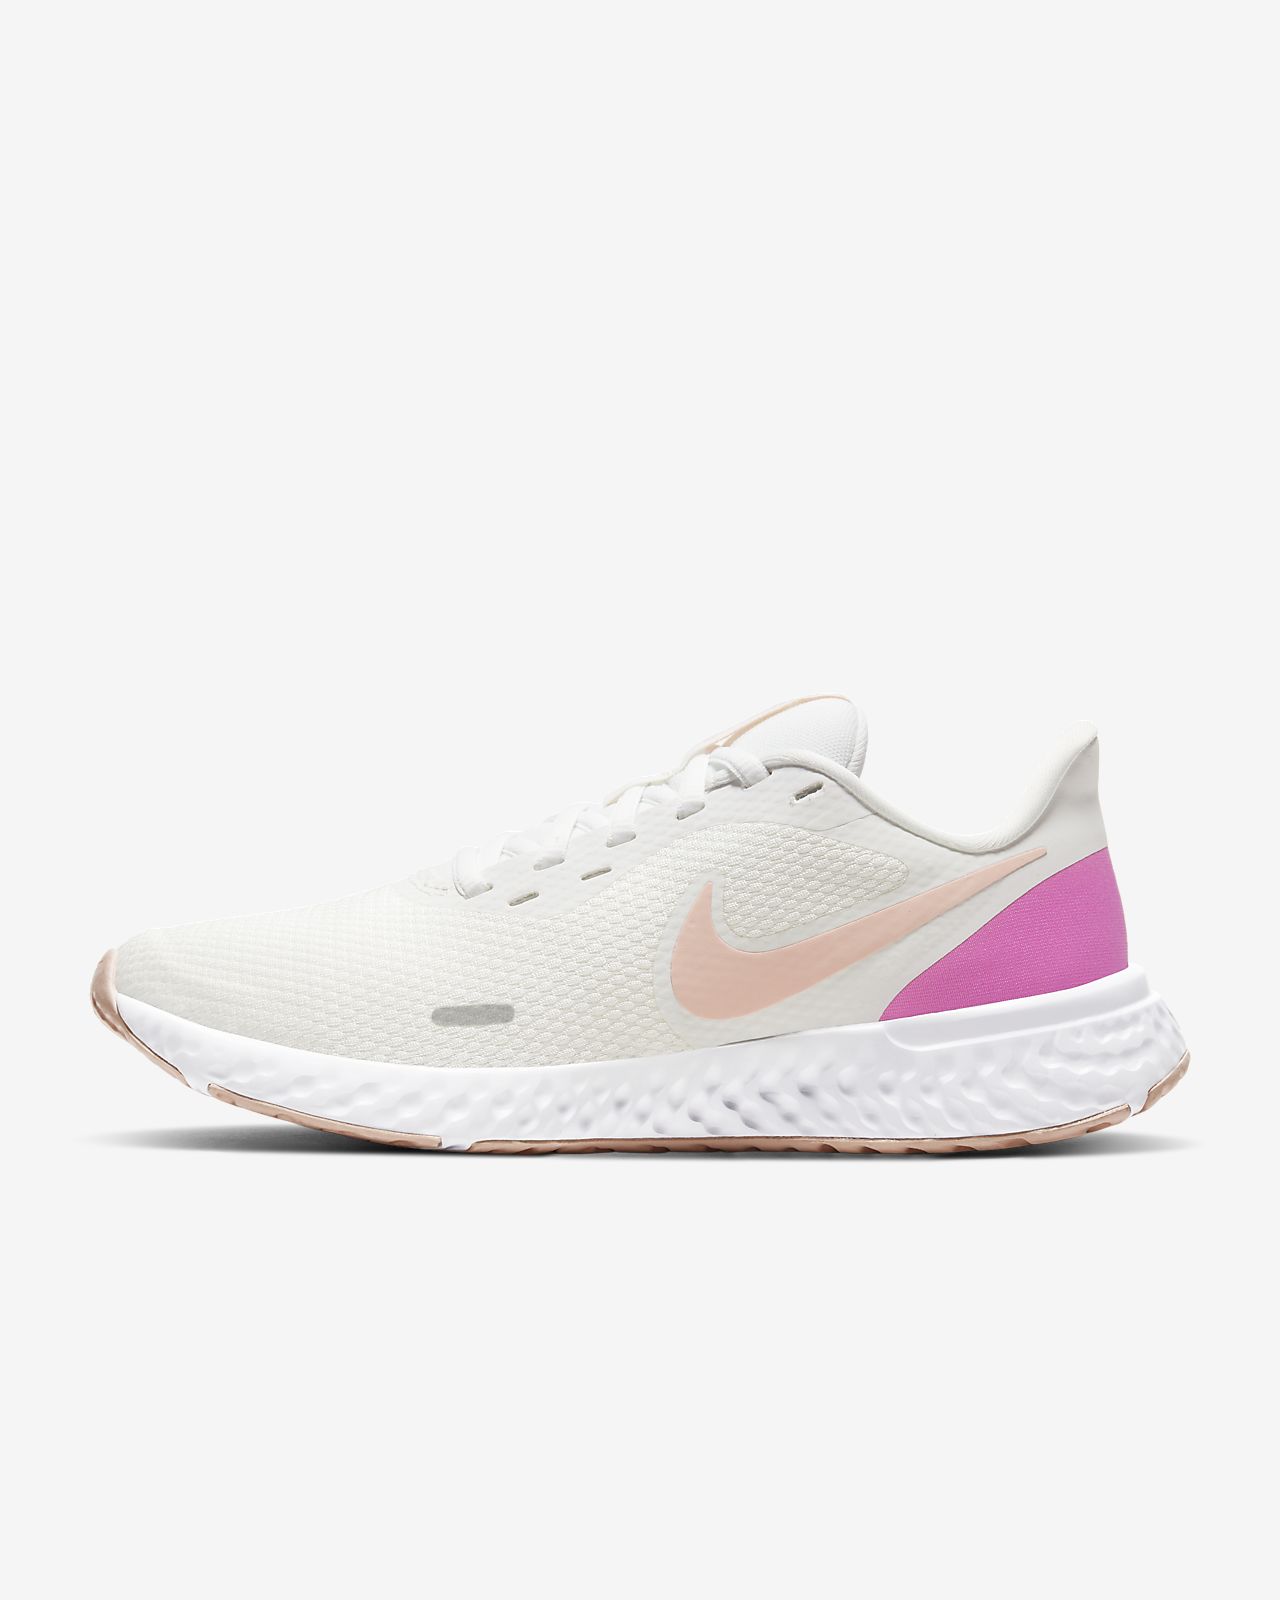 coral pink and gray nike revolution 3